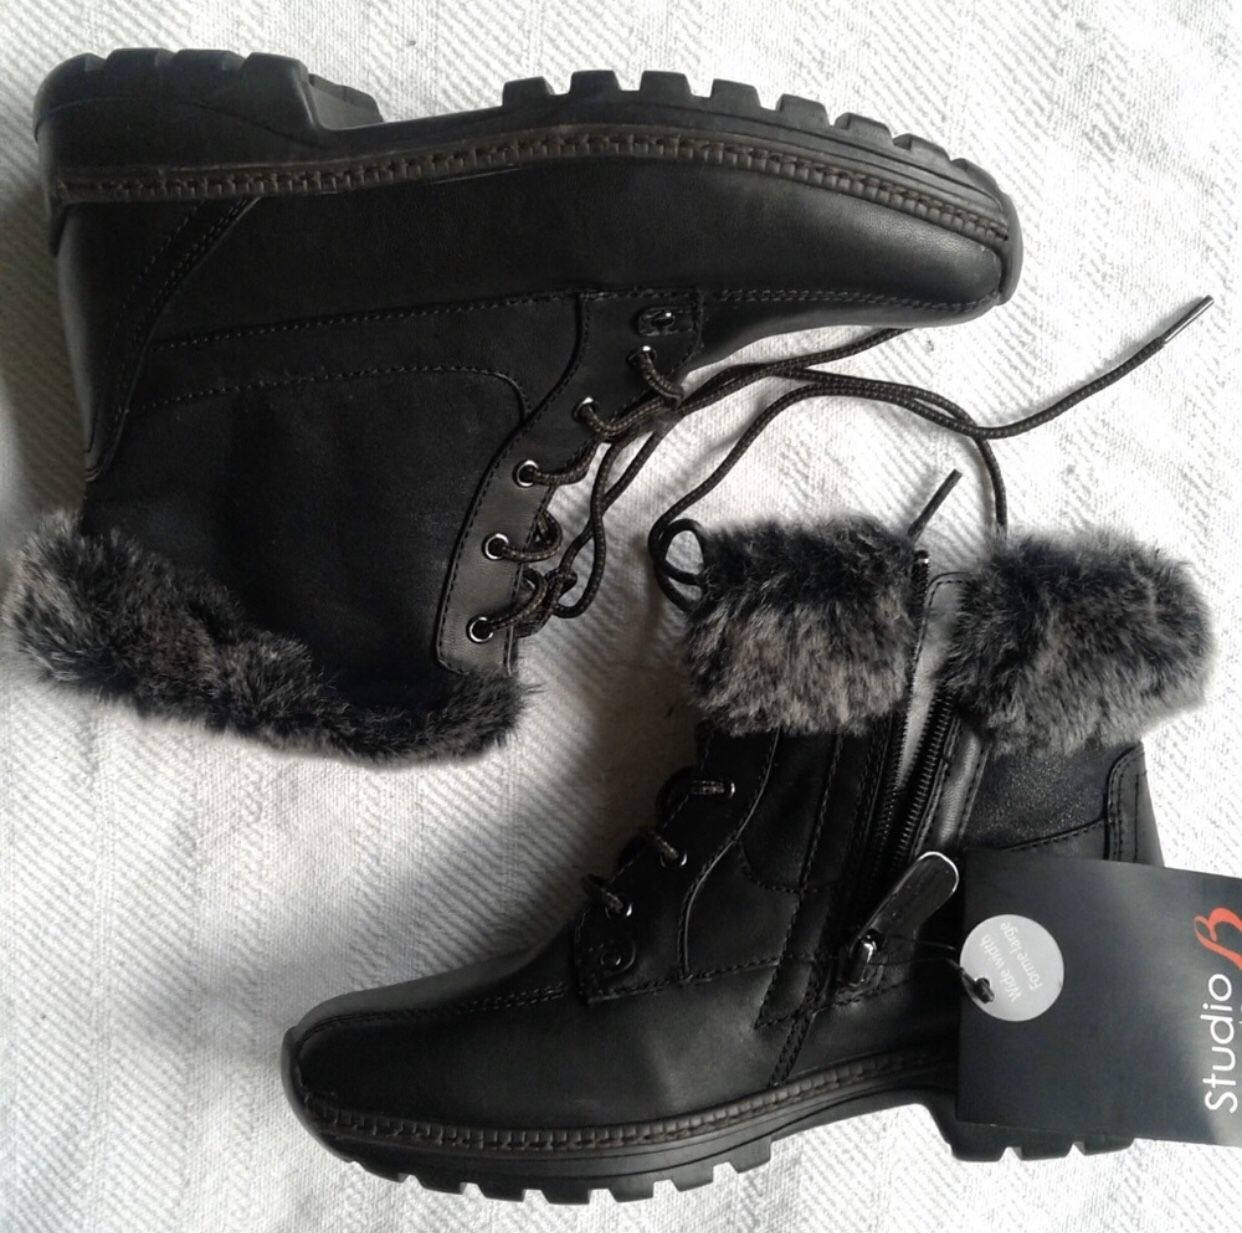 **NEW** LEATHER WOMEN WINTER BOOTS 6.5 WIDE